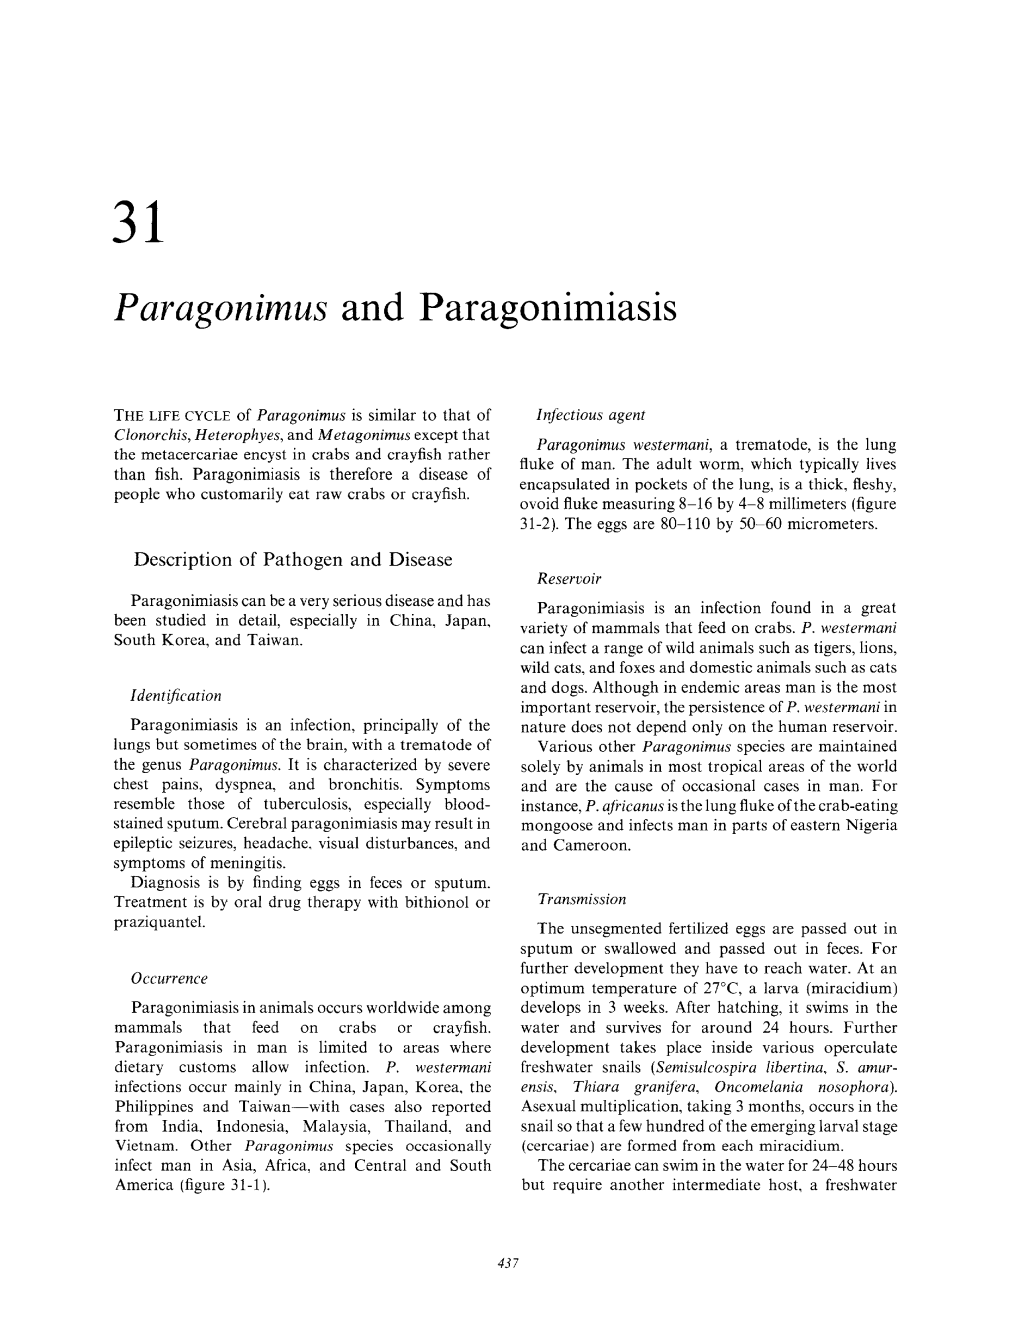 Paragonimus and Paragonimiasis in the Philippines